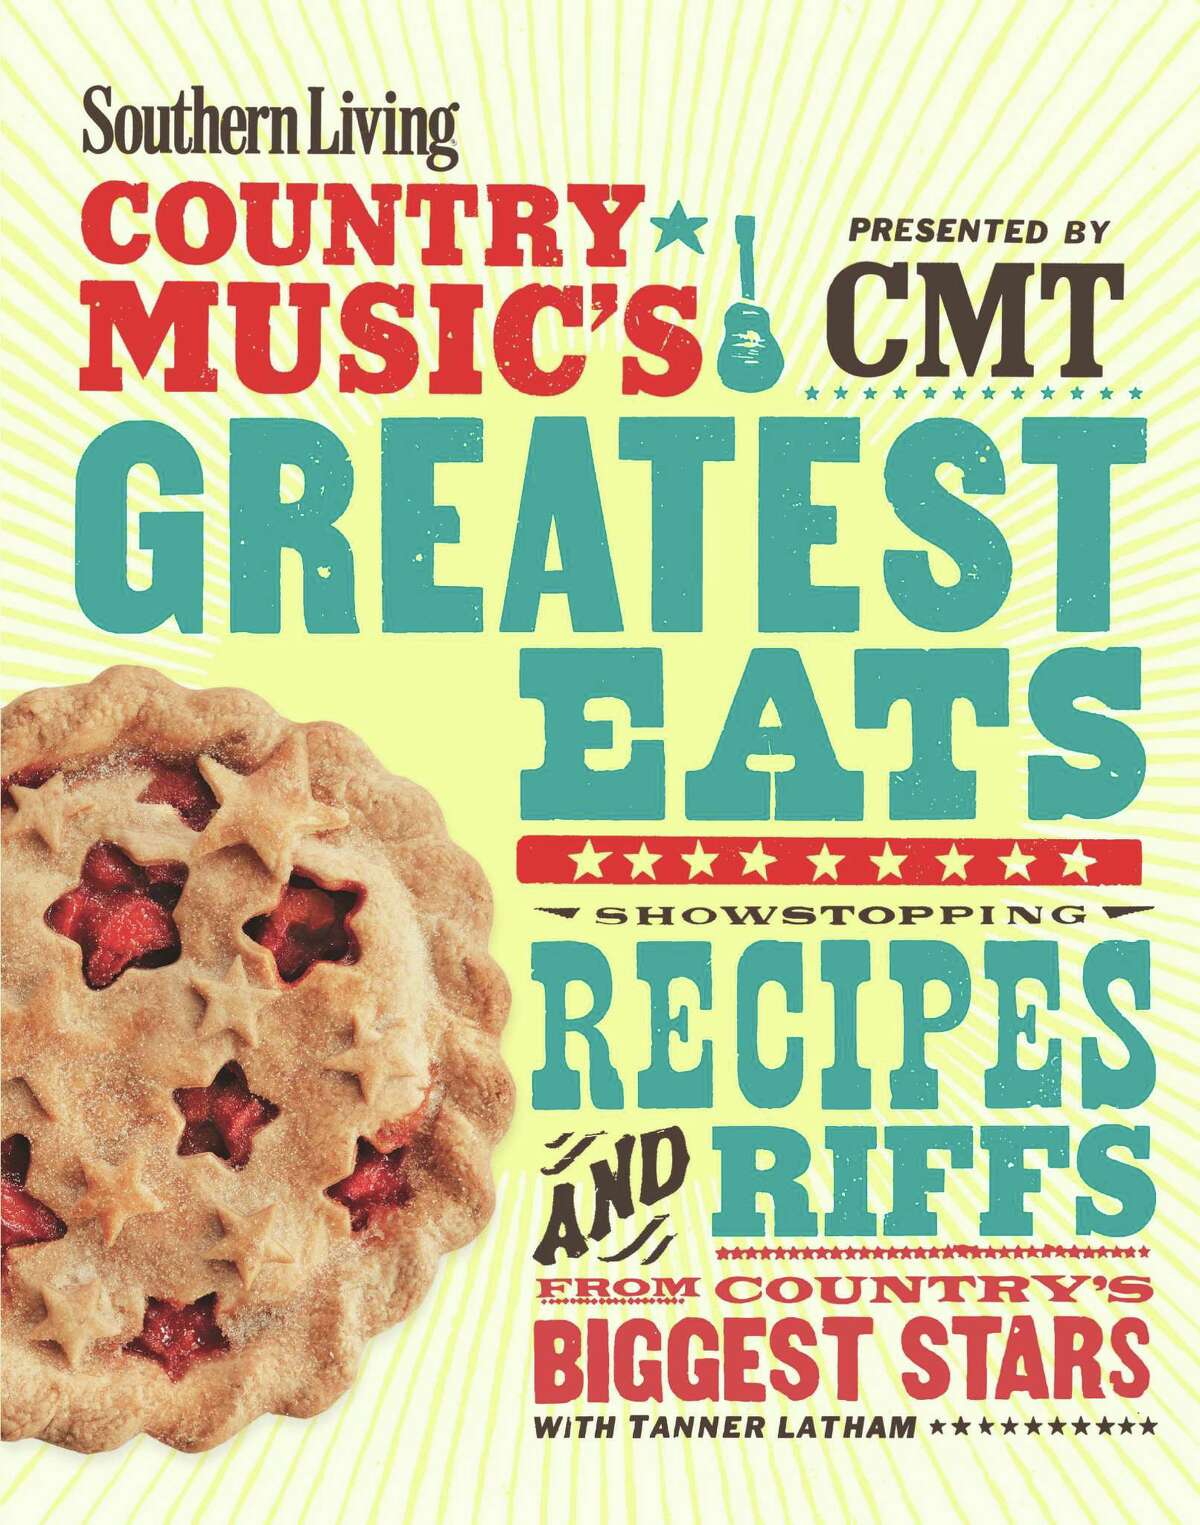 Southern Living and CMT's âCountry Musicâs Greatest Eatsâ (Oxmoor House), by Tanner Latham